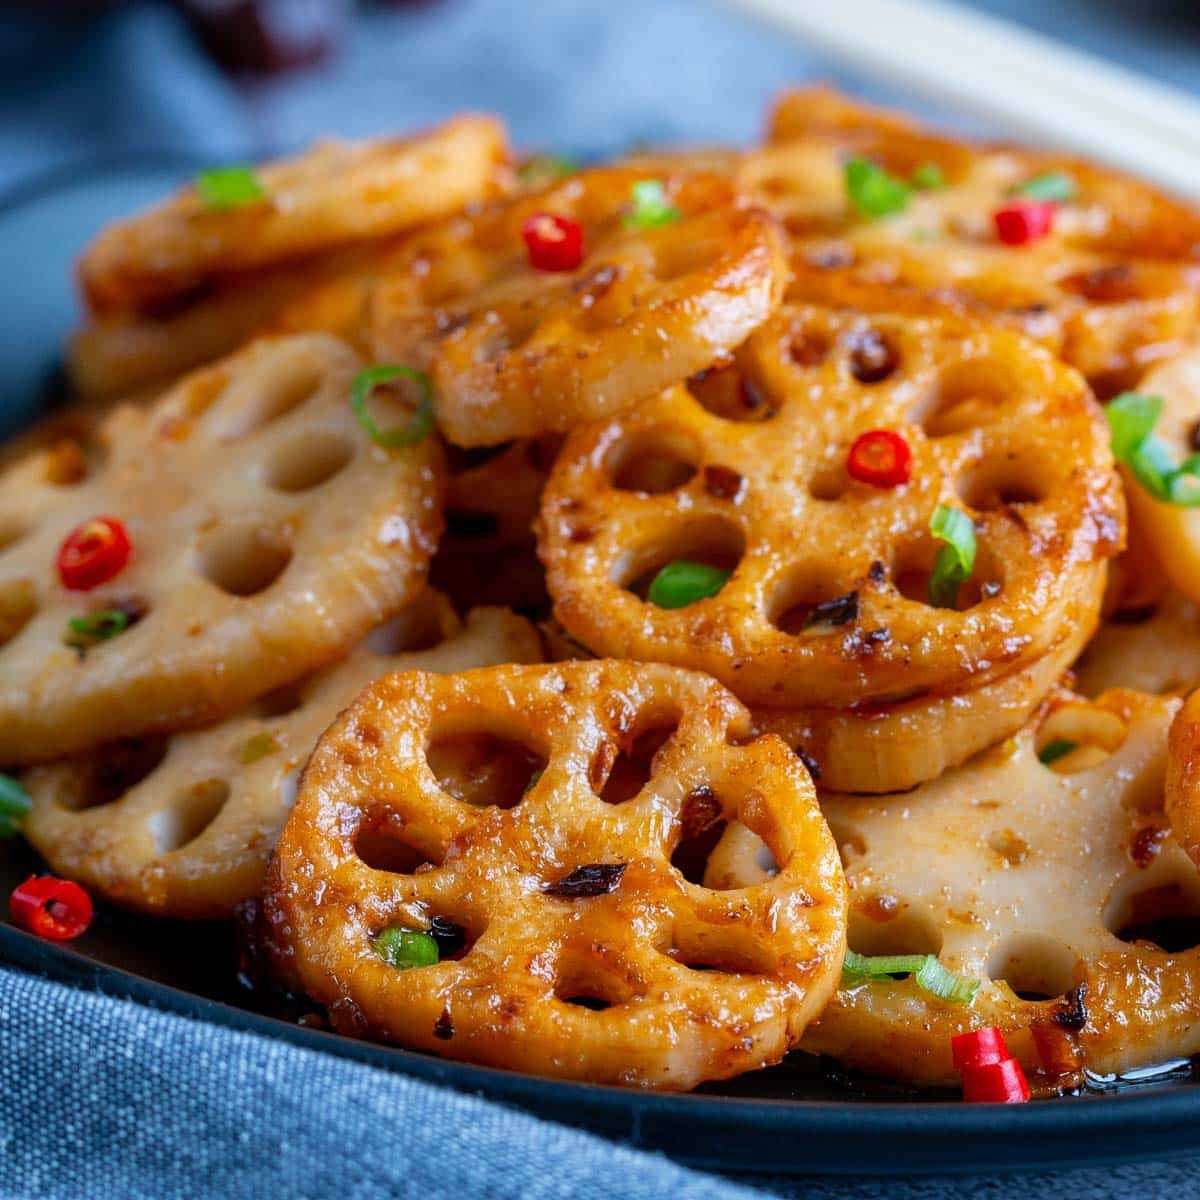 Spicy Lotus Root Stir Fry on a black plate garnished with chili and green onions.